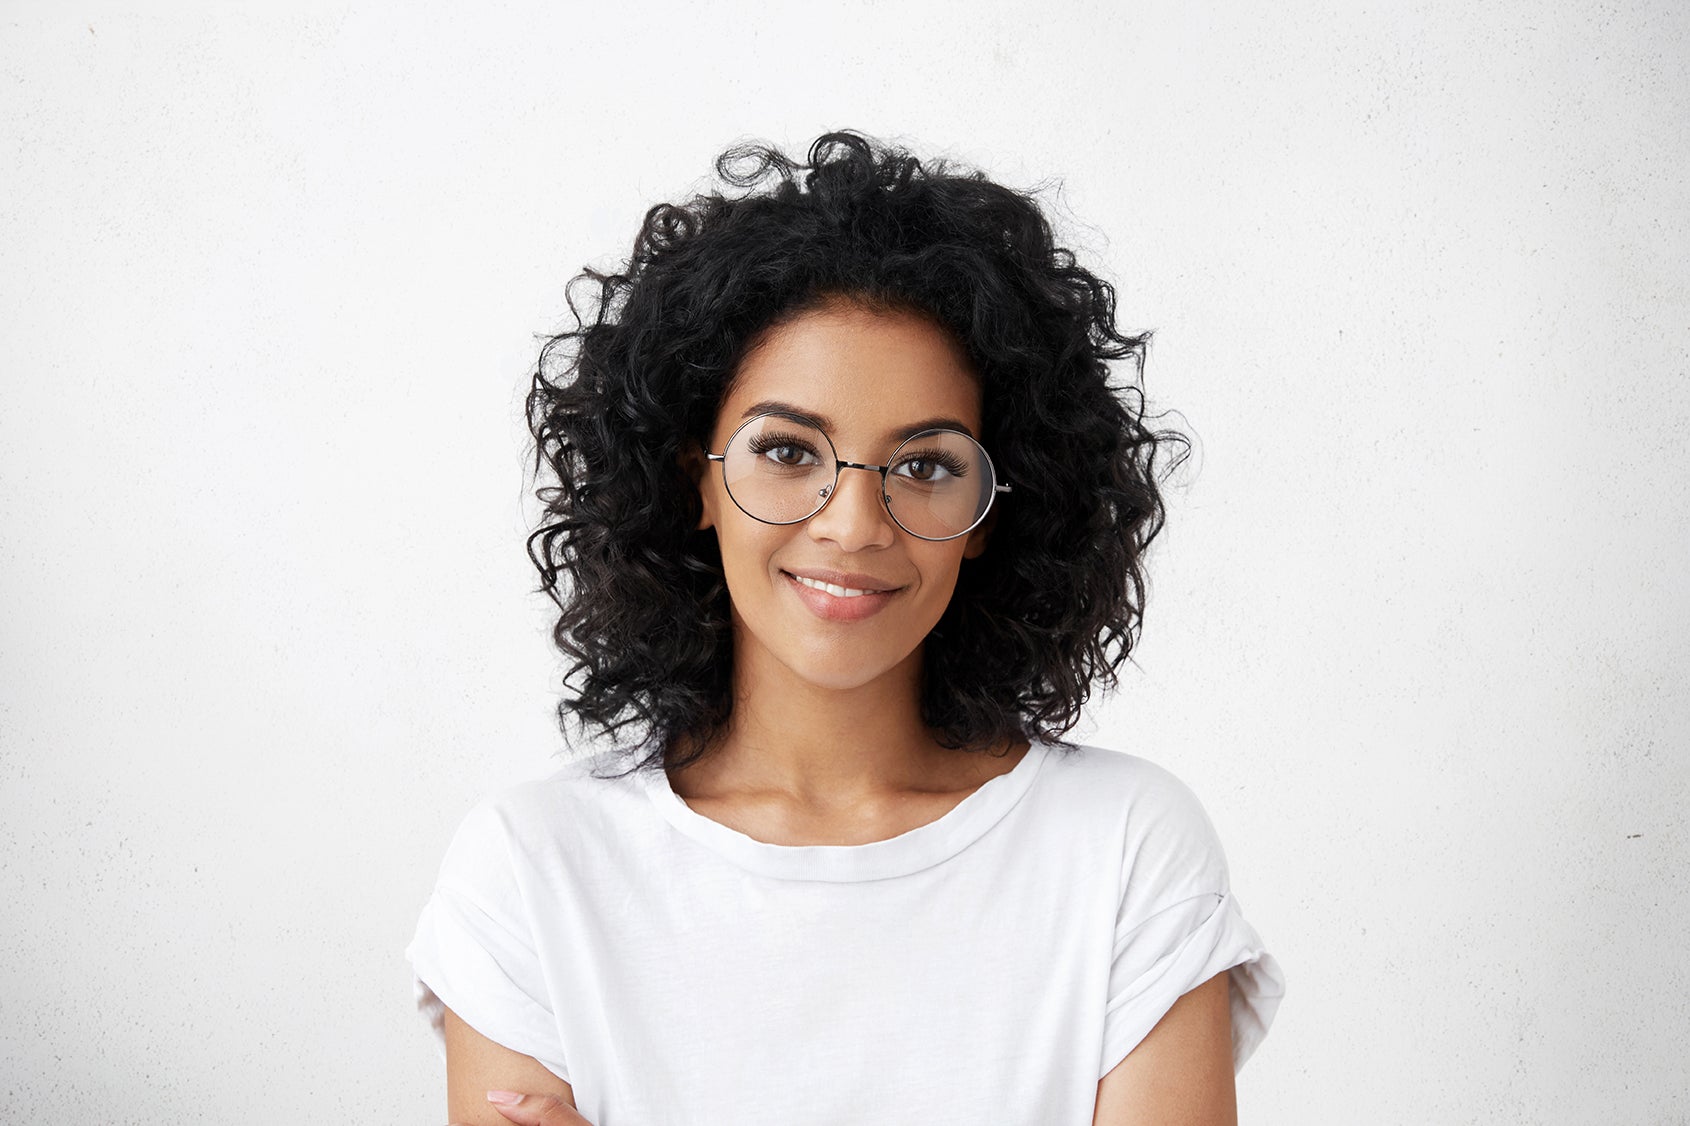 attractive black woman in white tee with curly hair rocking stylish glasses with lash extensions